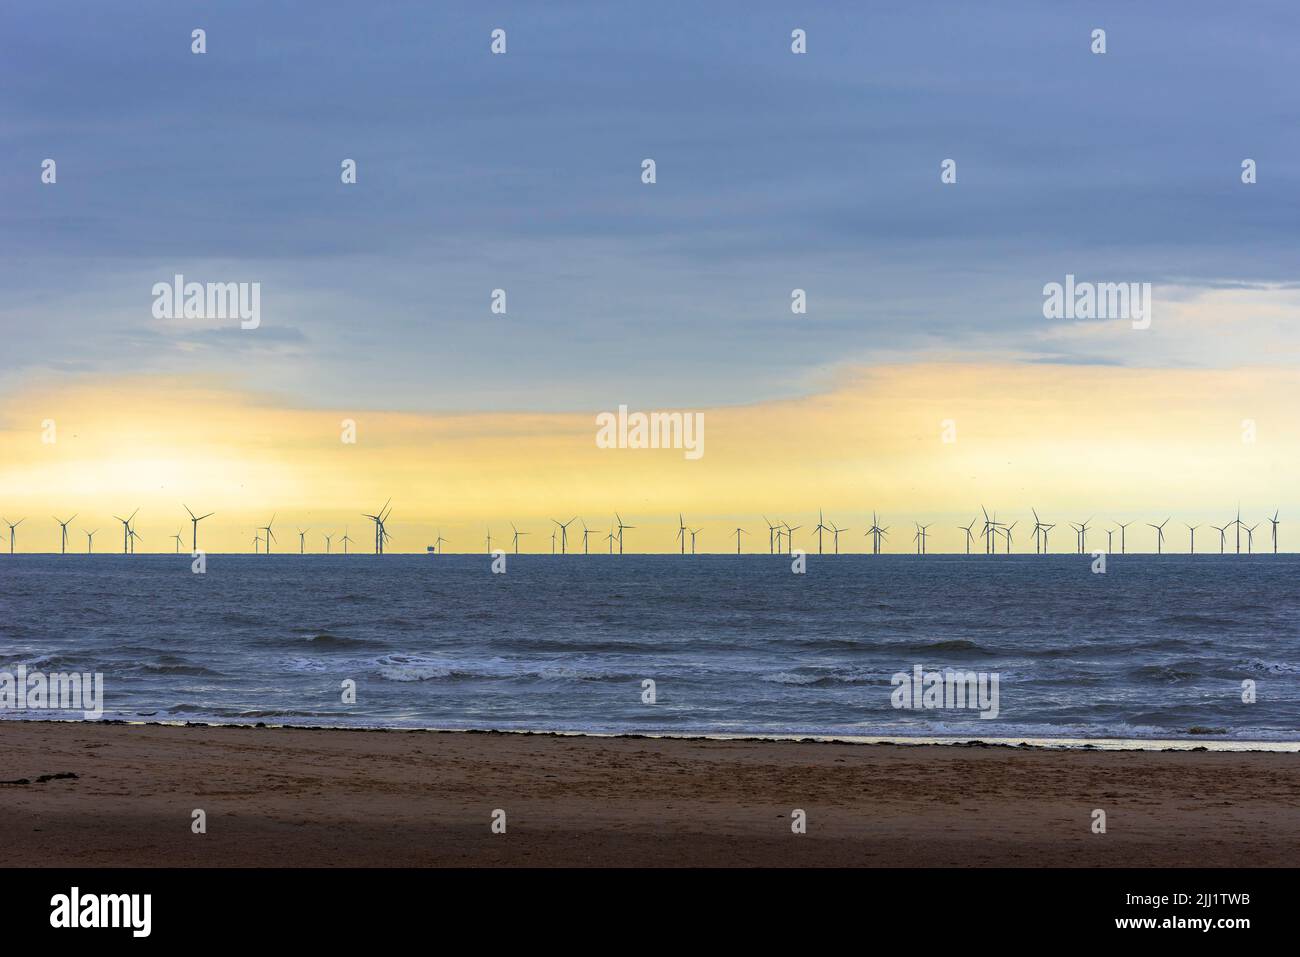 The windmills of the Mersey Bay windfarm in the evening light. Stock Photo